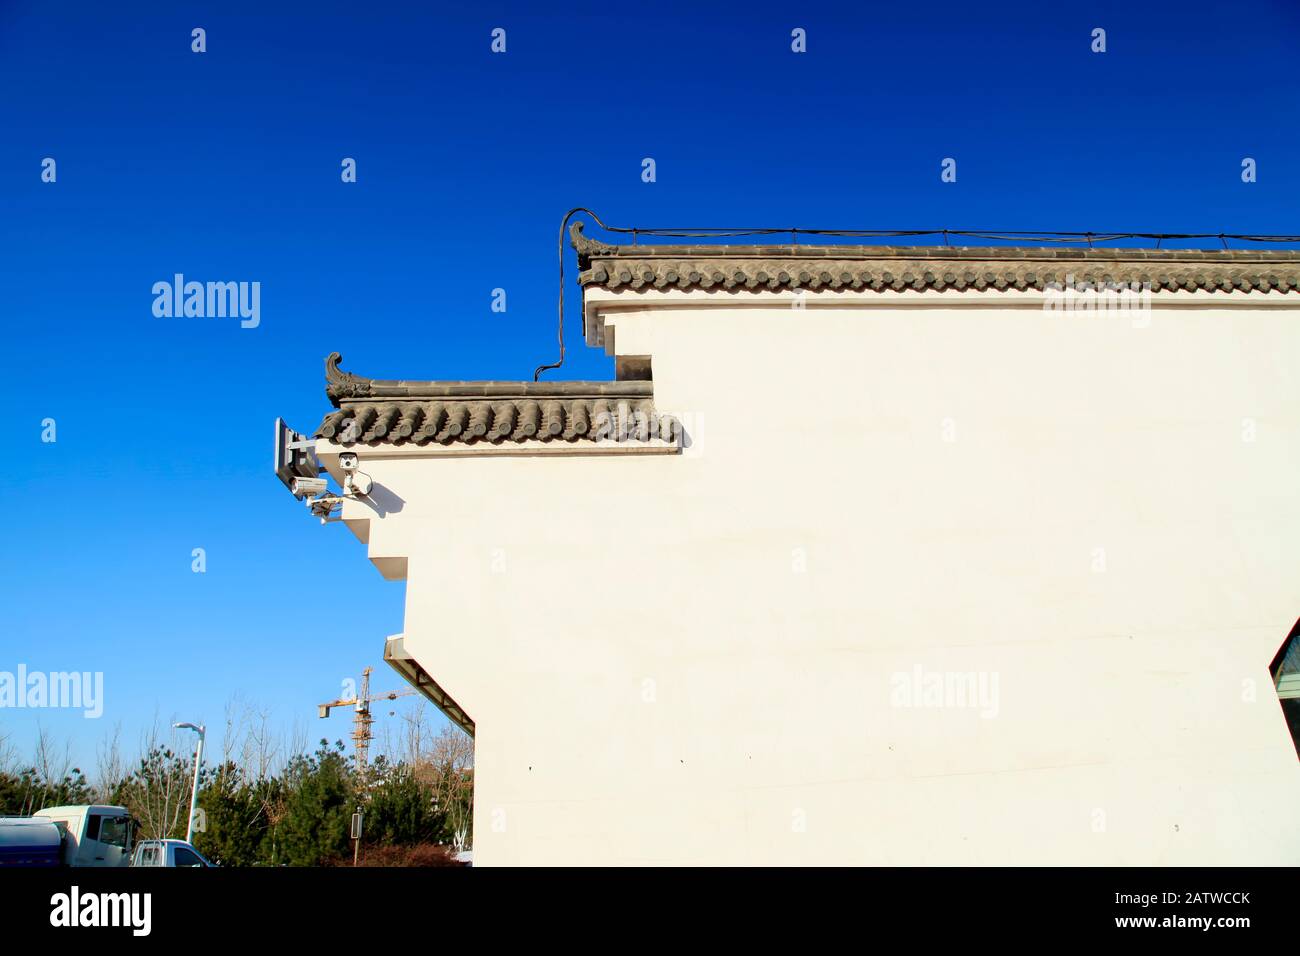 China has been gloriously enrolled buildings Stock Photo